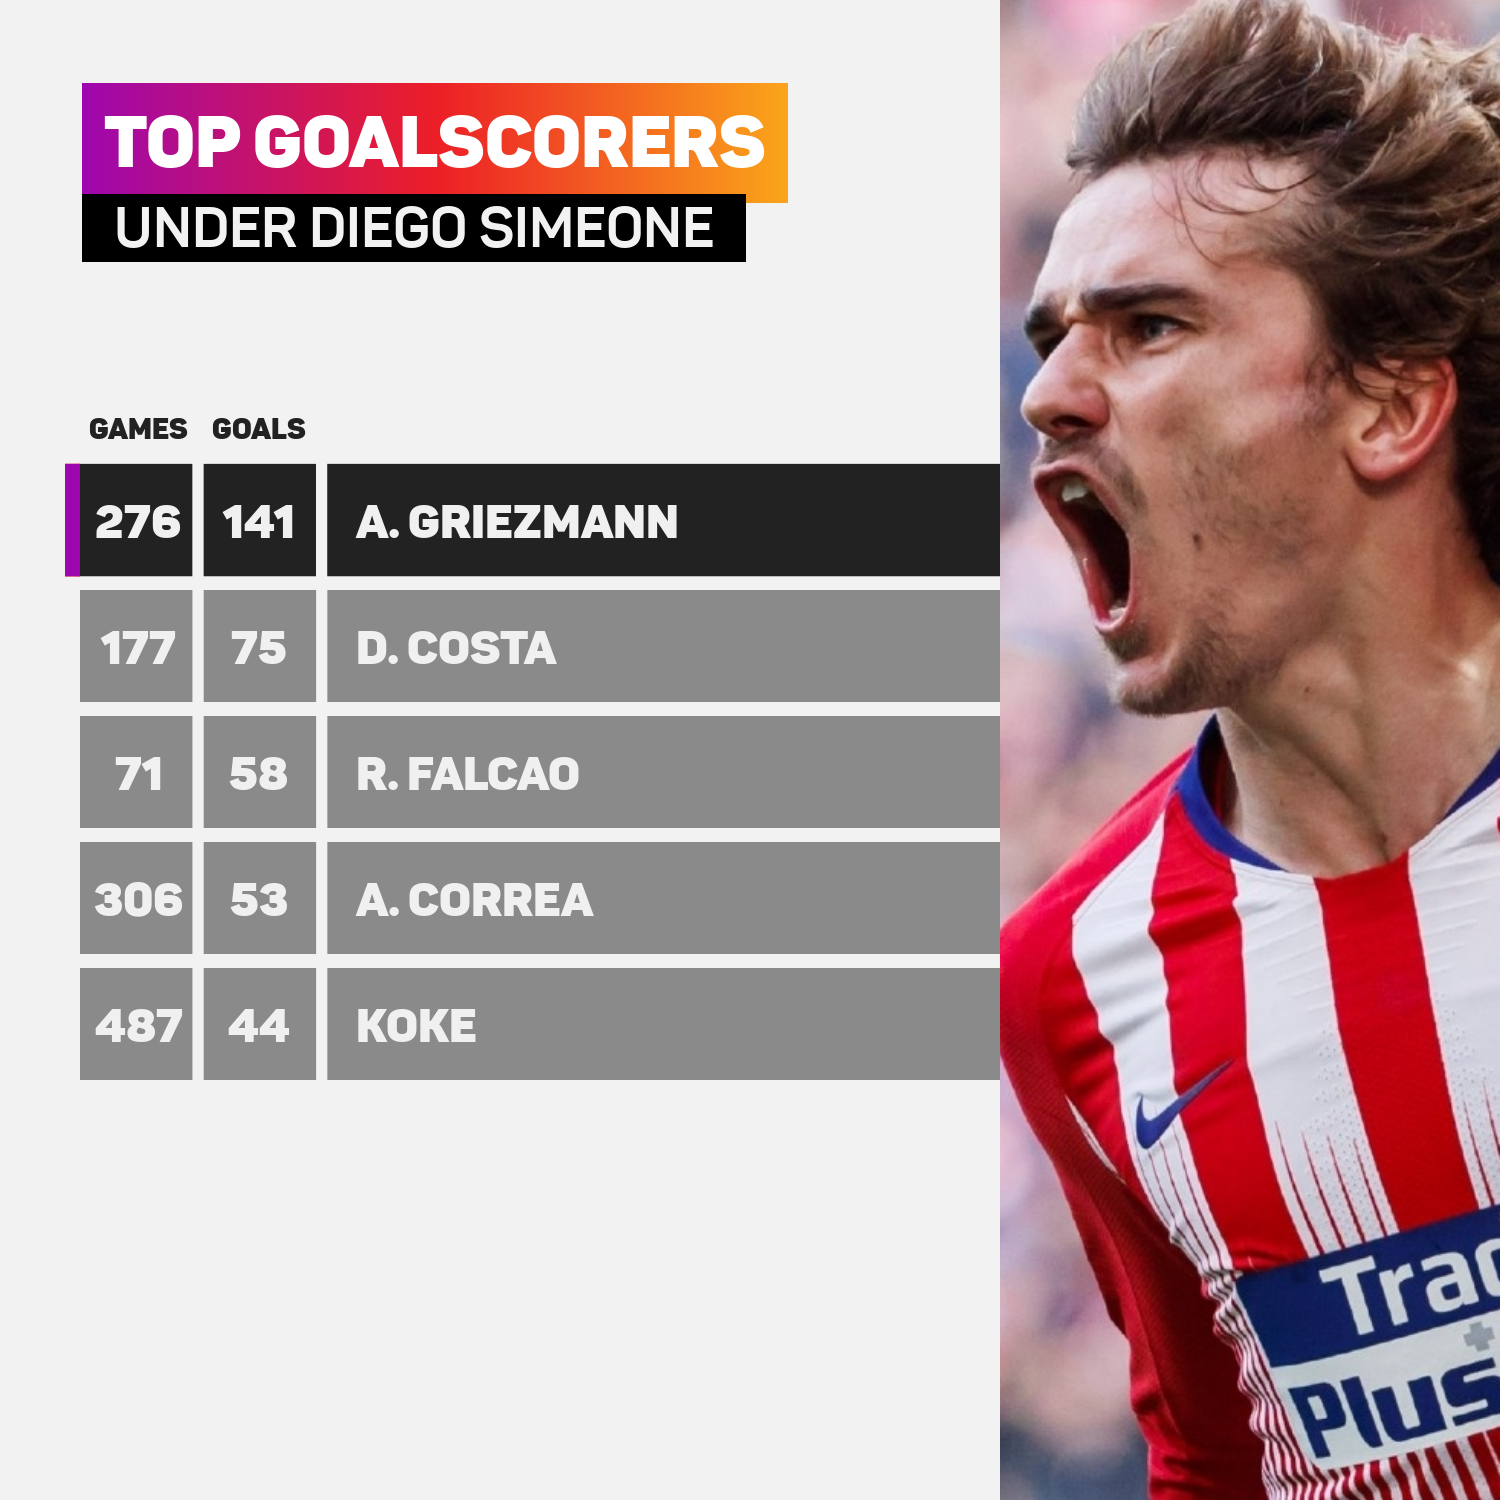 Top goalscorers under Diego Simeone at Atletico Madrid